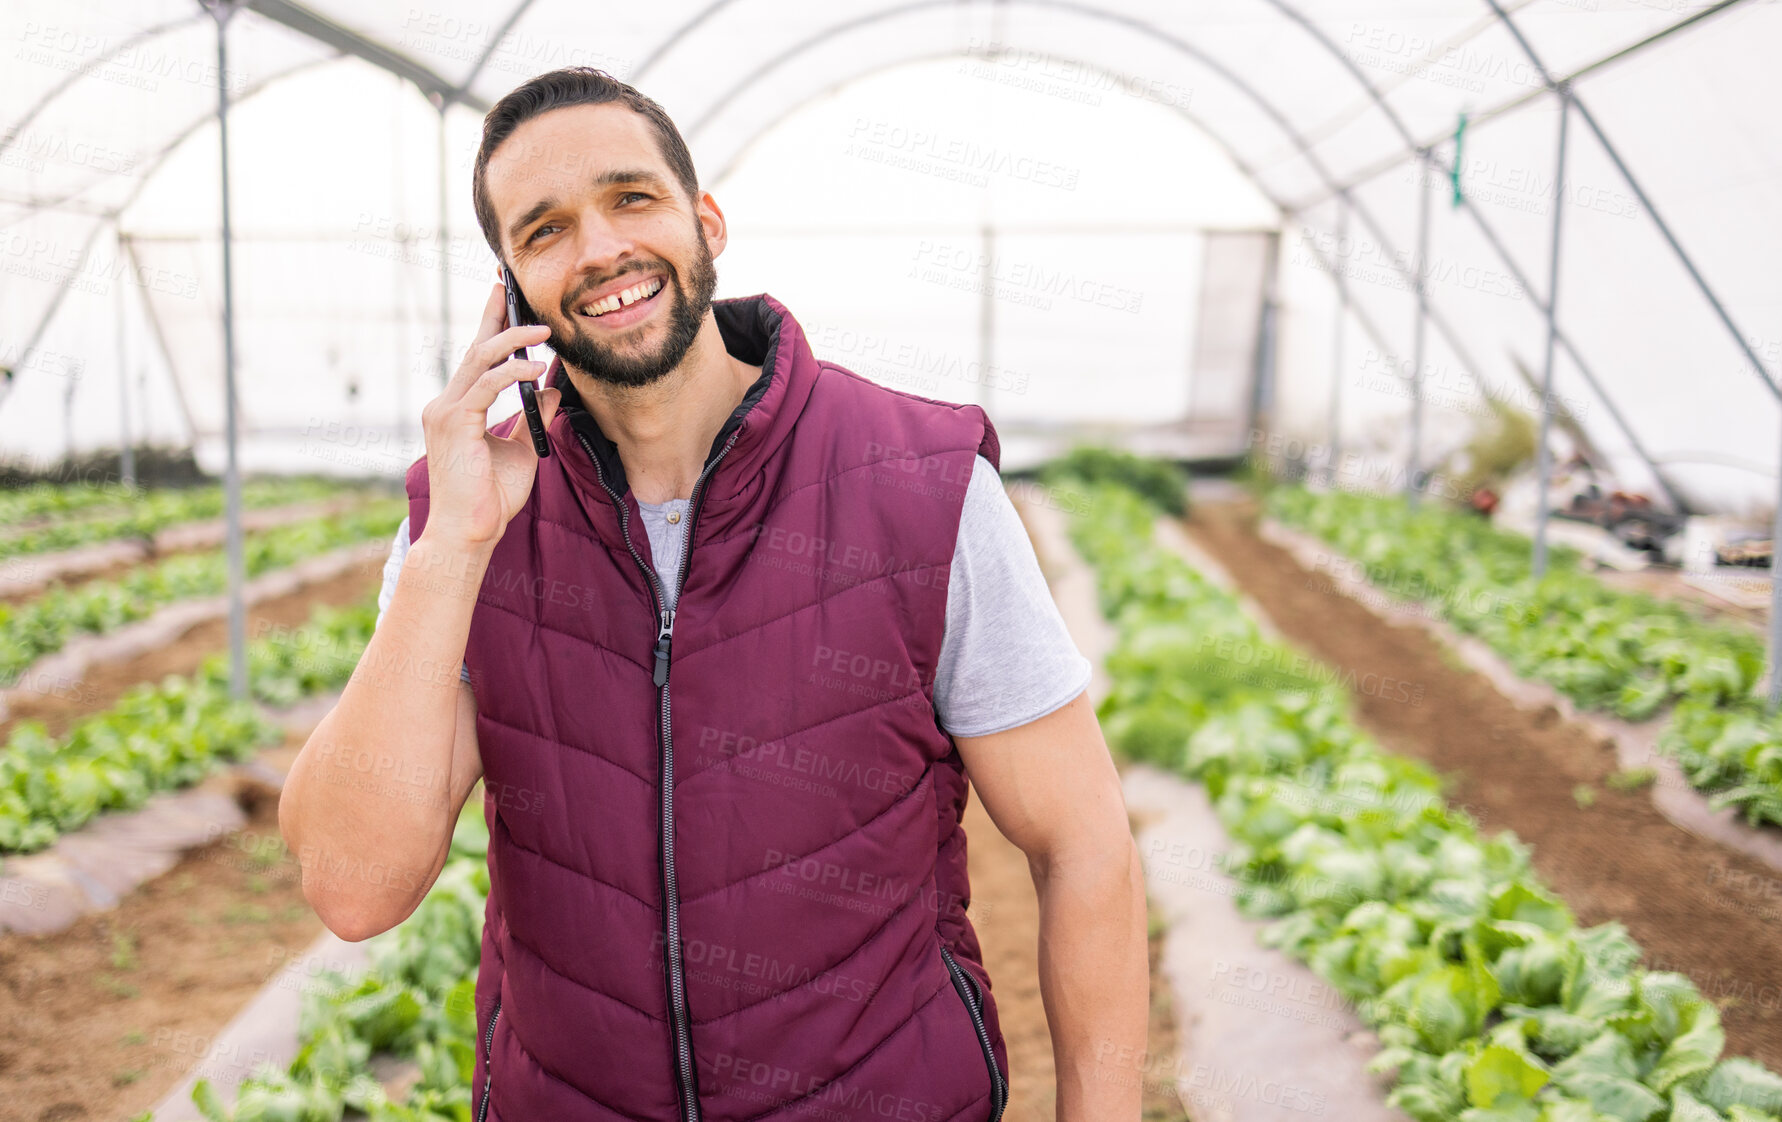 Buy stock photo Greenhouse, phone call and man on agriculture farm talking, discussion or harvest conversation. Agro, small business and male farmer from Canada on 5g mobile speaking about crops or growth of plants.